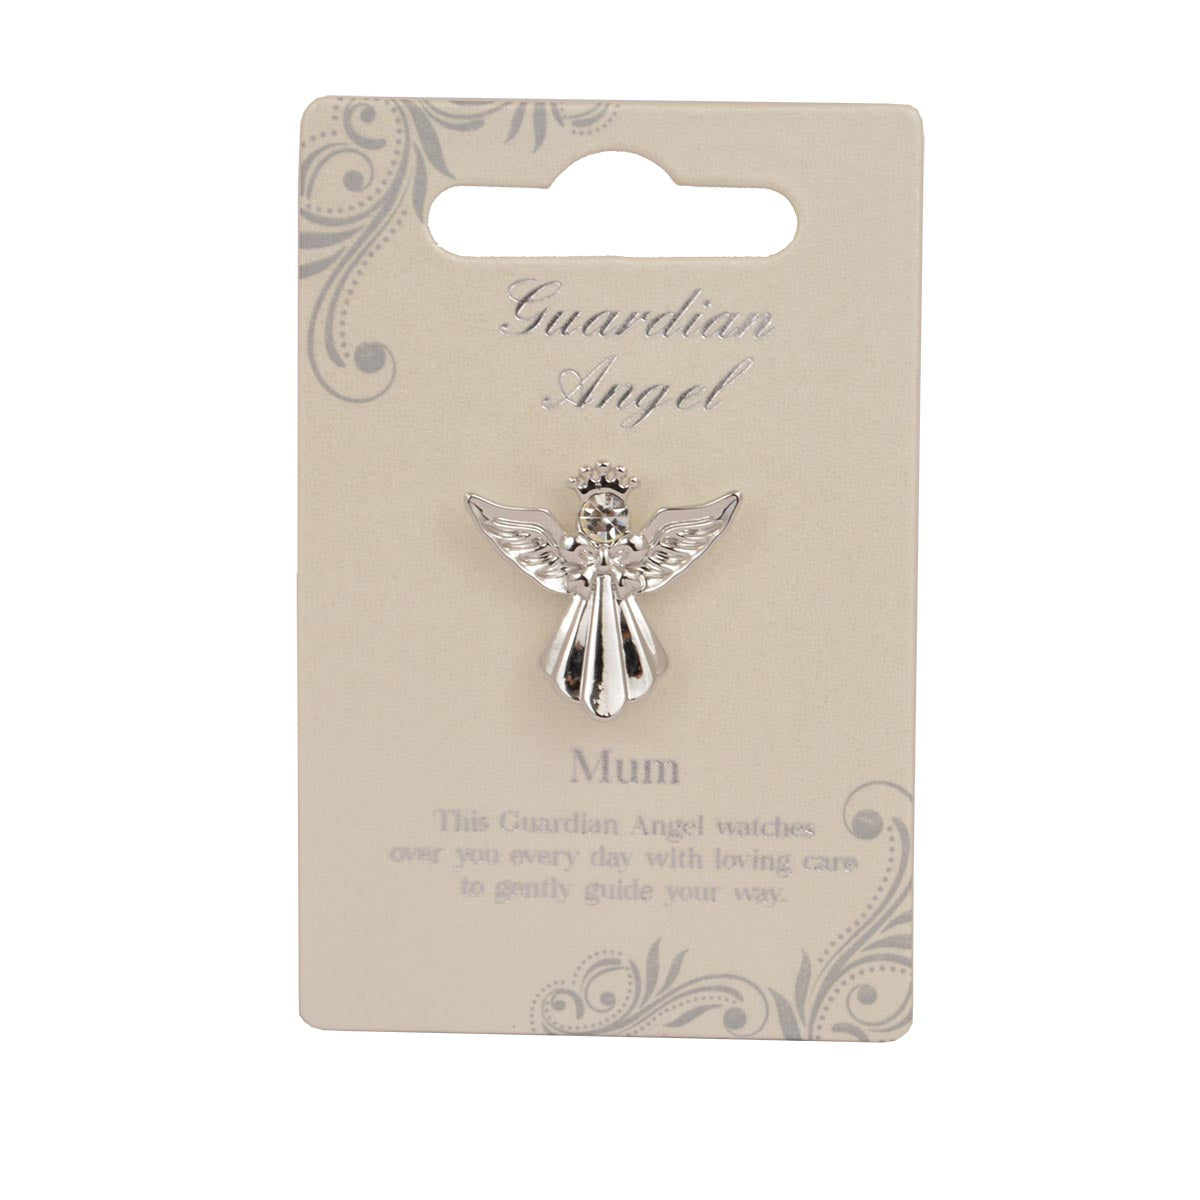 Mum Guardian Angel Silver Coloured Angel Pin With Gem Stone